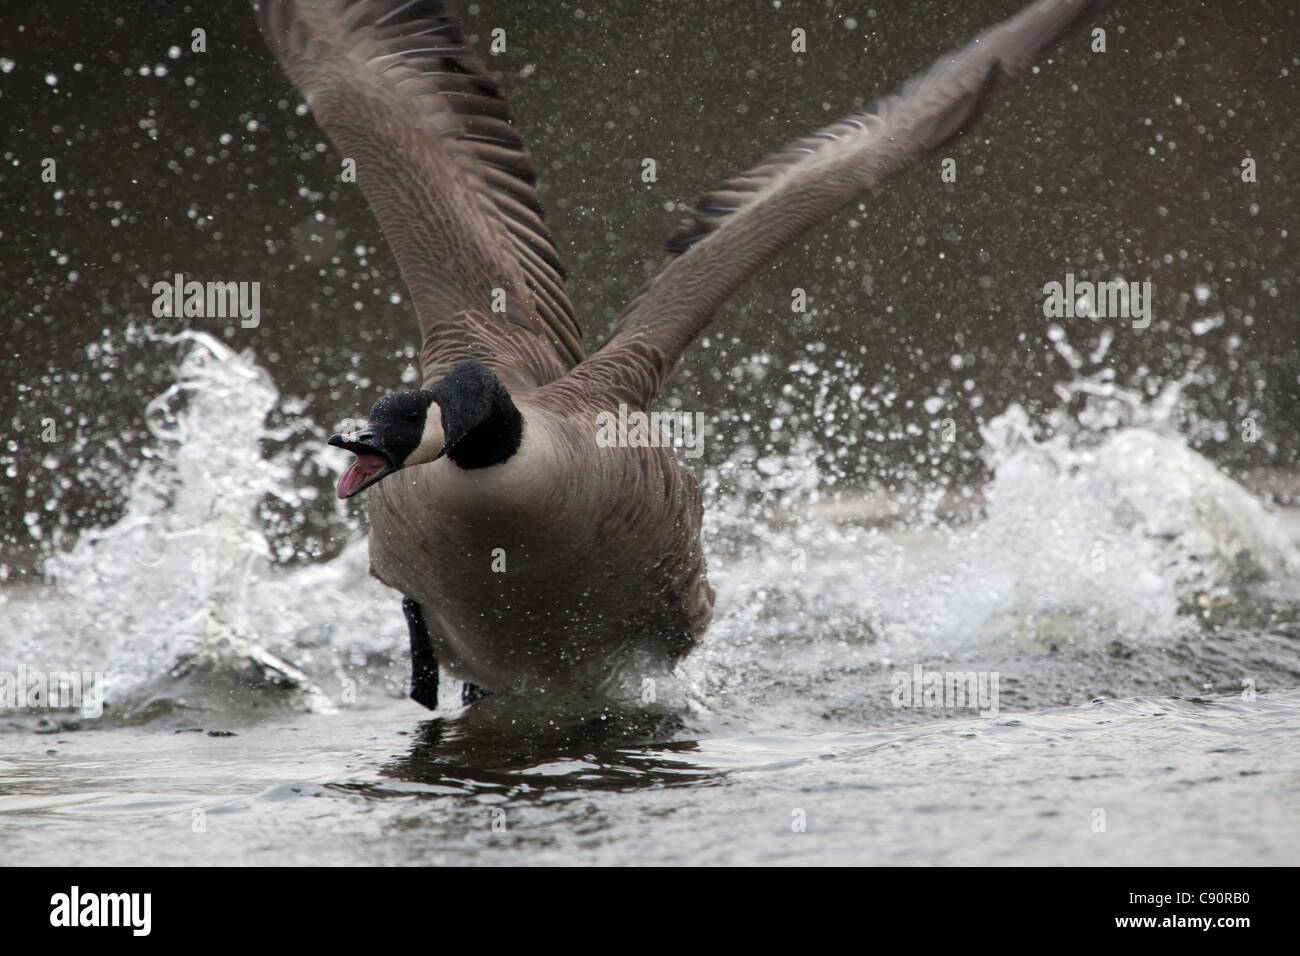 Canada Goose - angry Stock Photo